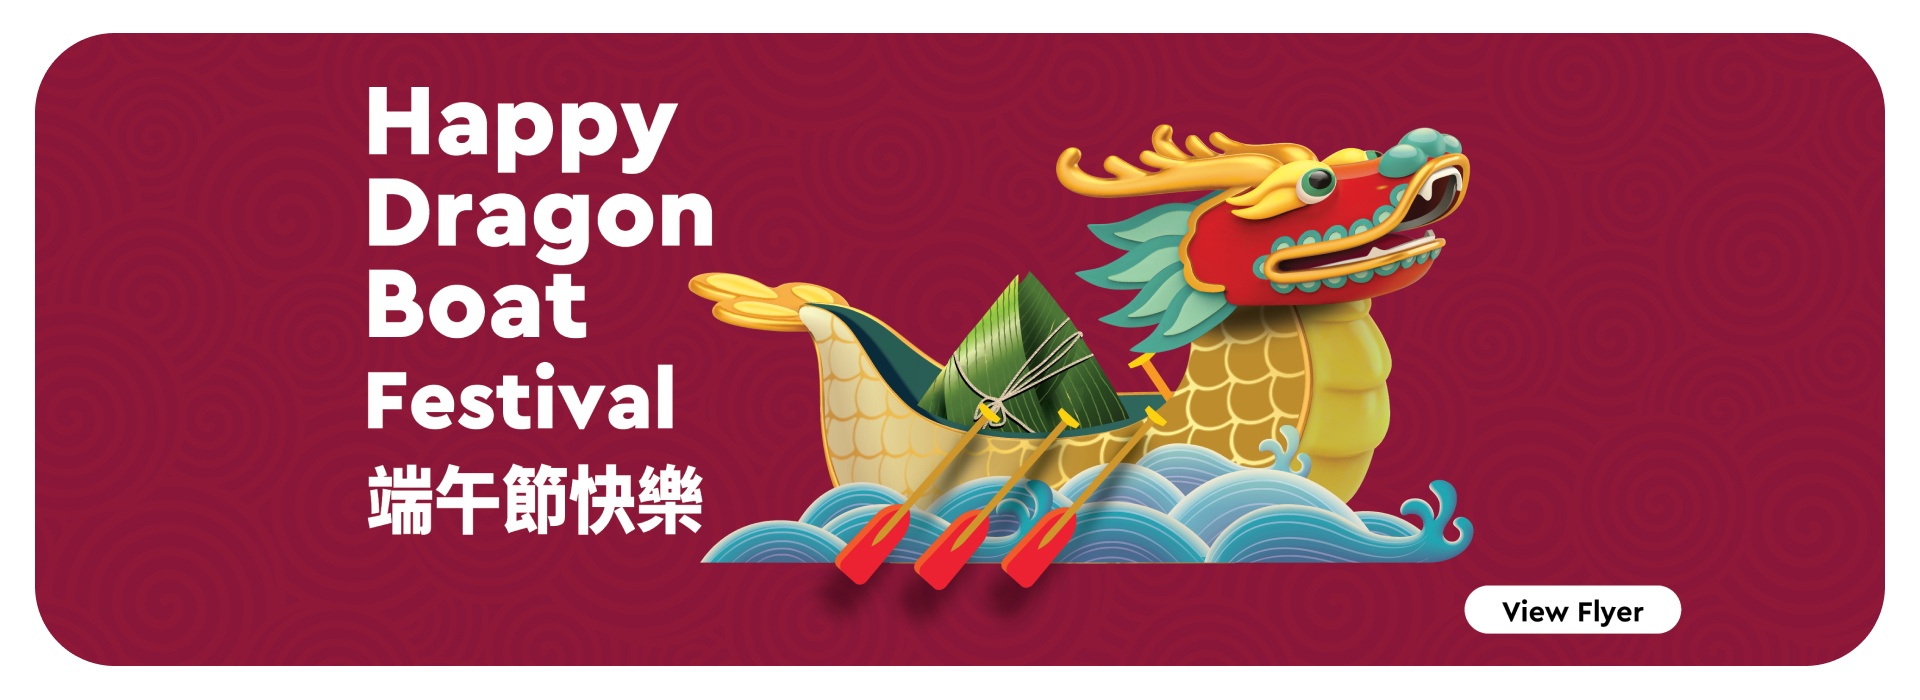 The following image contains the text,"Â Happy Dragon Boat Festival along with the 'view flyer' button."